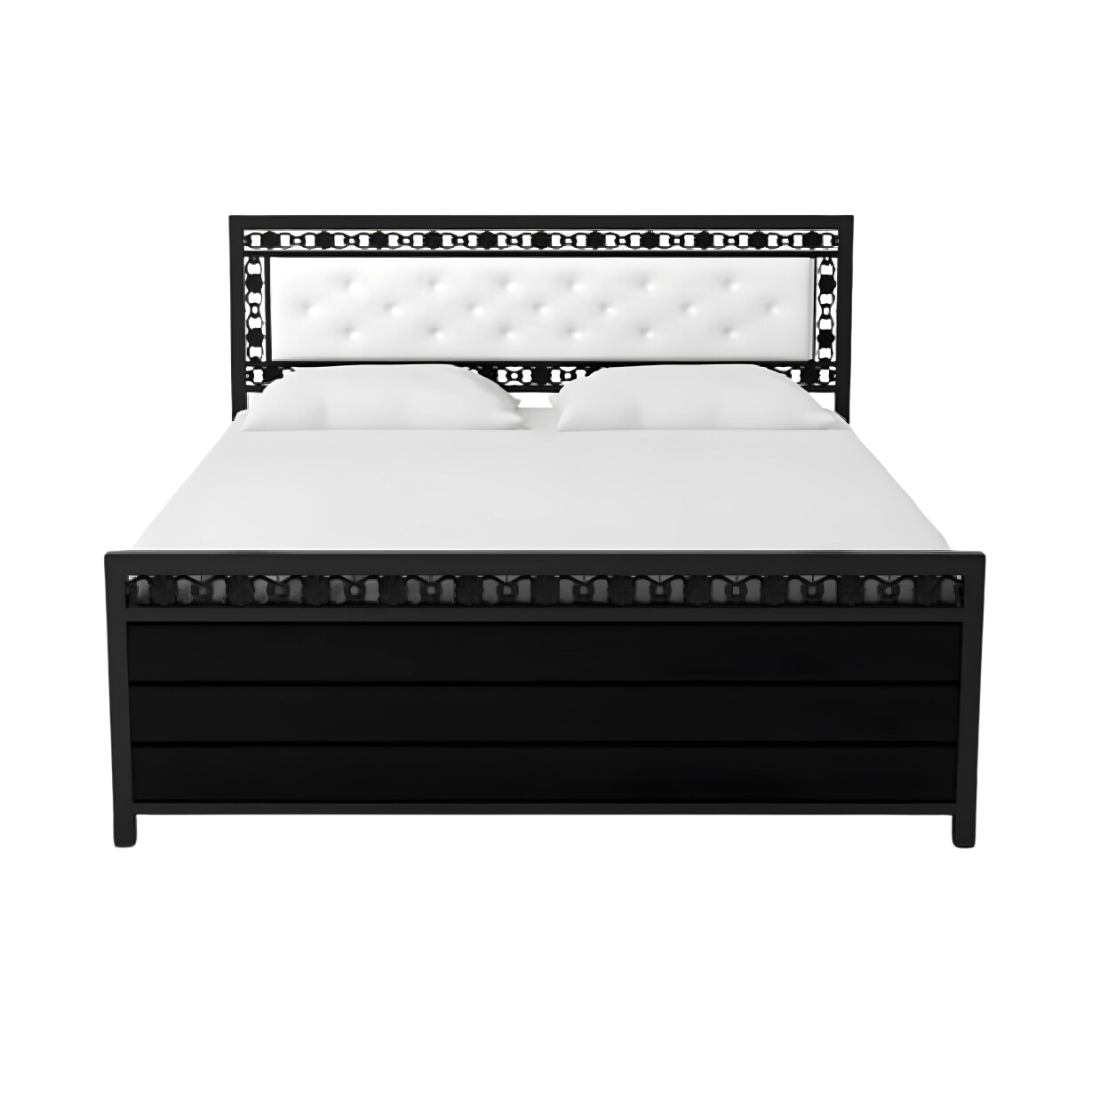 Cuba Hydraulic Storage Single Metal Bed with White Cushion Headrest (Color - Black)